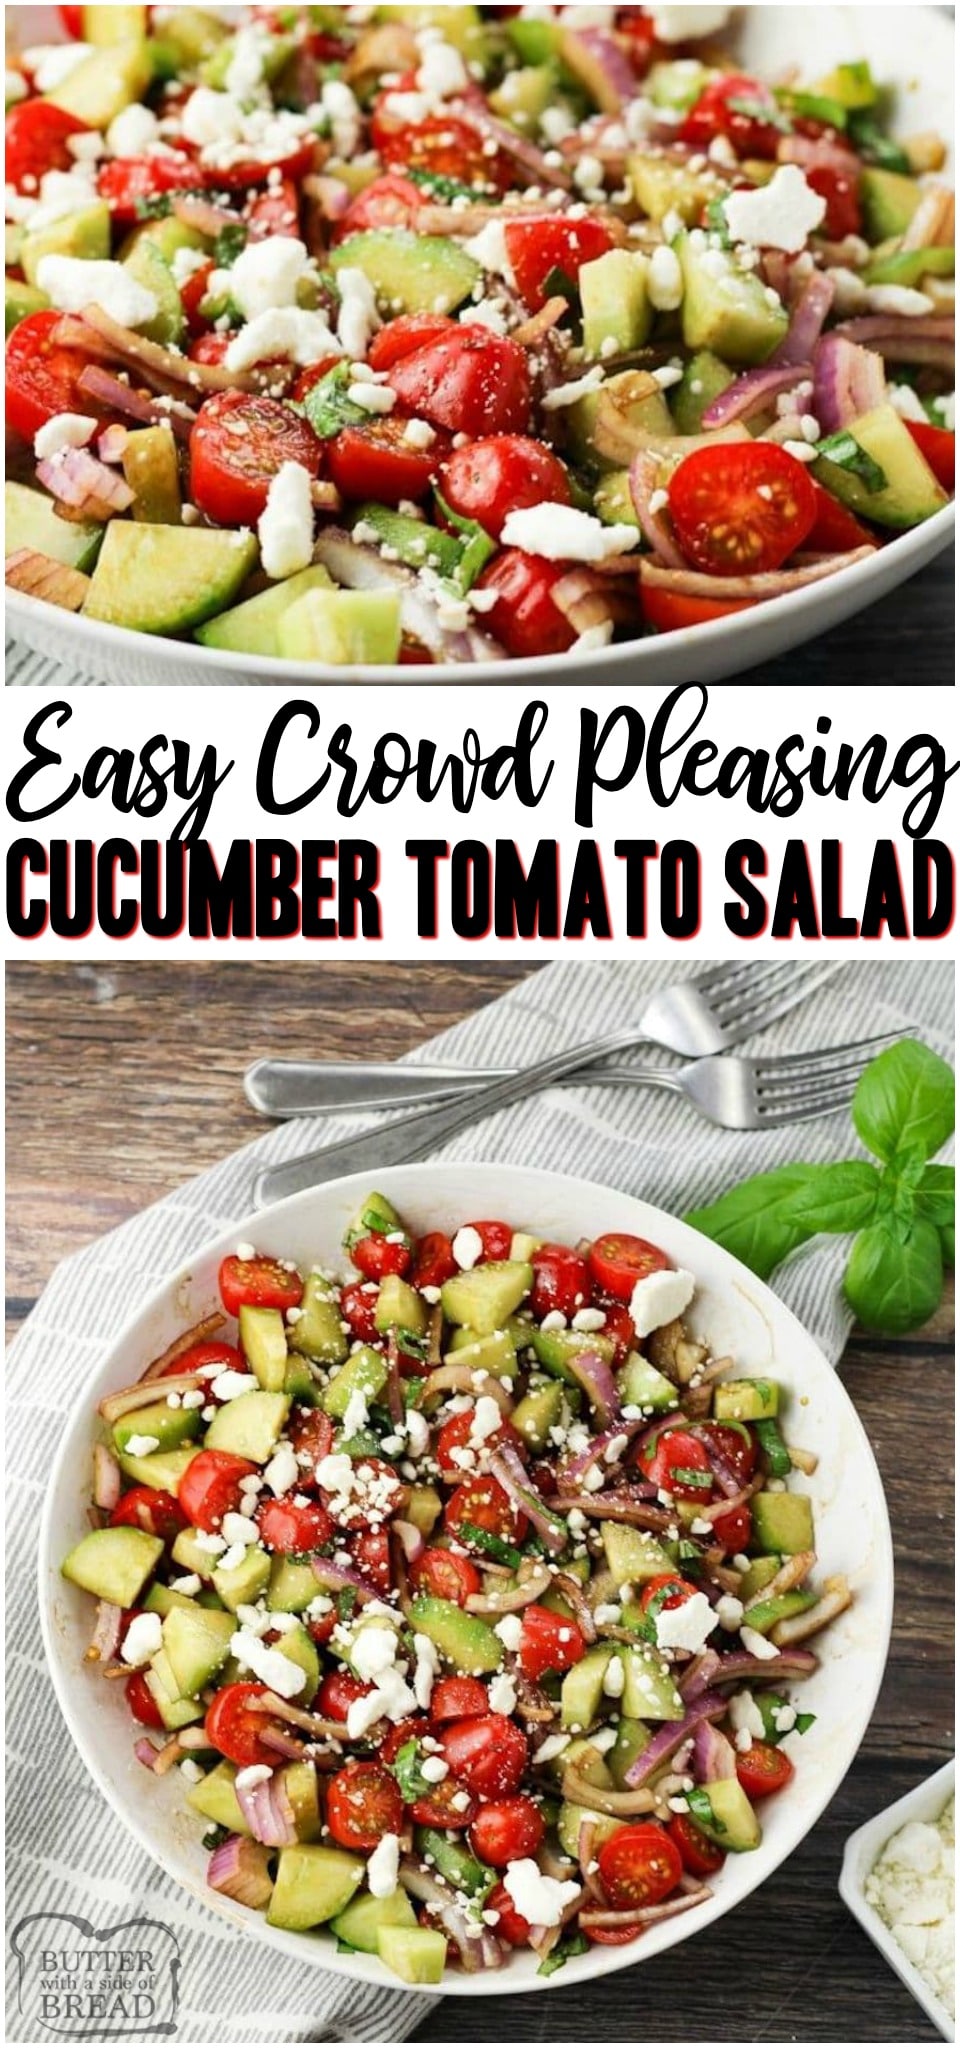 Cucumber and Tomato Salad is a simple, healthy salad made in minutes with just 8 ingredients! Fresh flavors and tangy dressing make this easy salad recipe a hit! #salad #veggies #cucumber #tomato #vinaigrette #recipe from BUTTER WITH A SIDE OF BREAD 